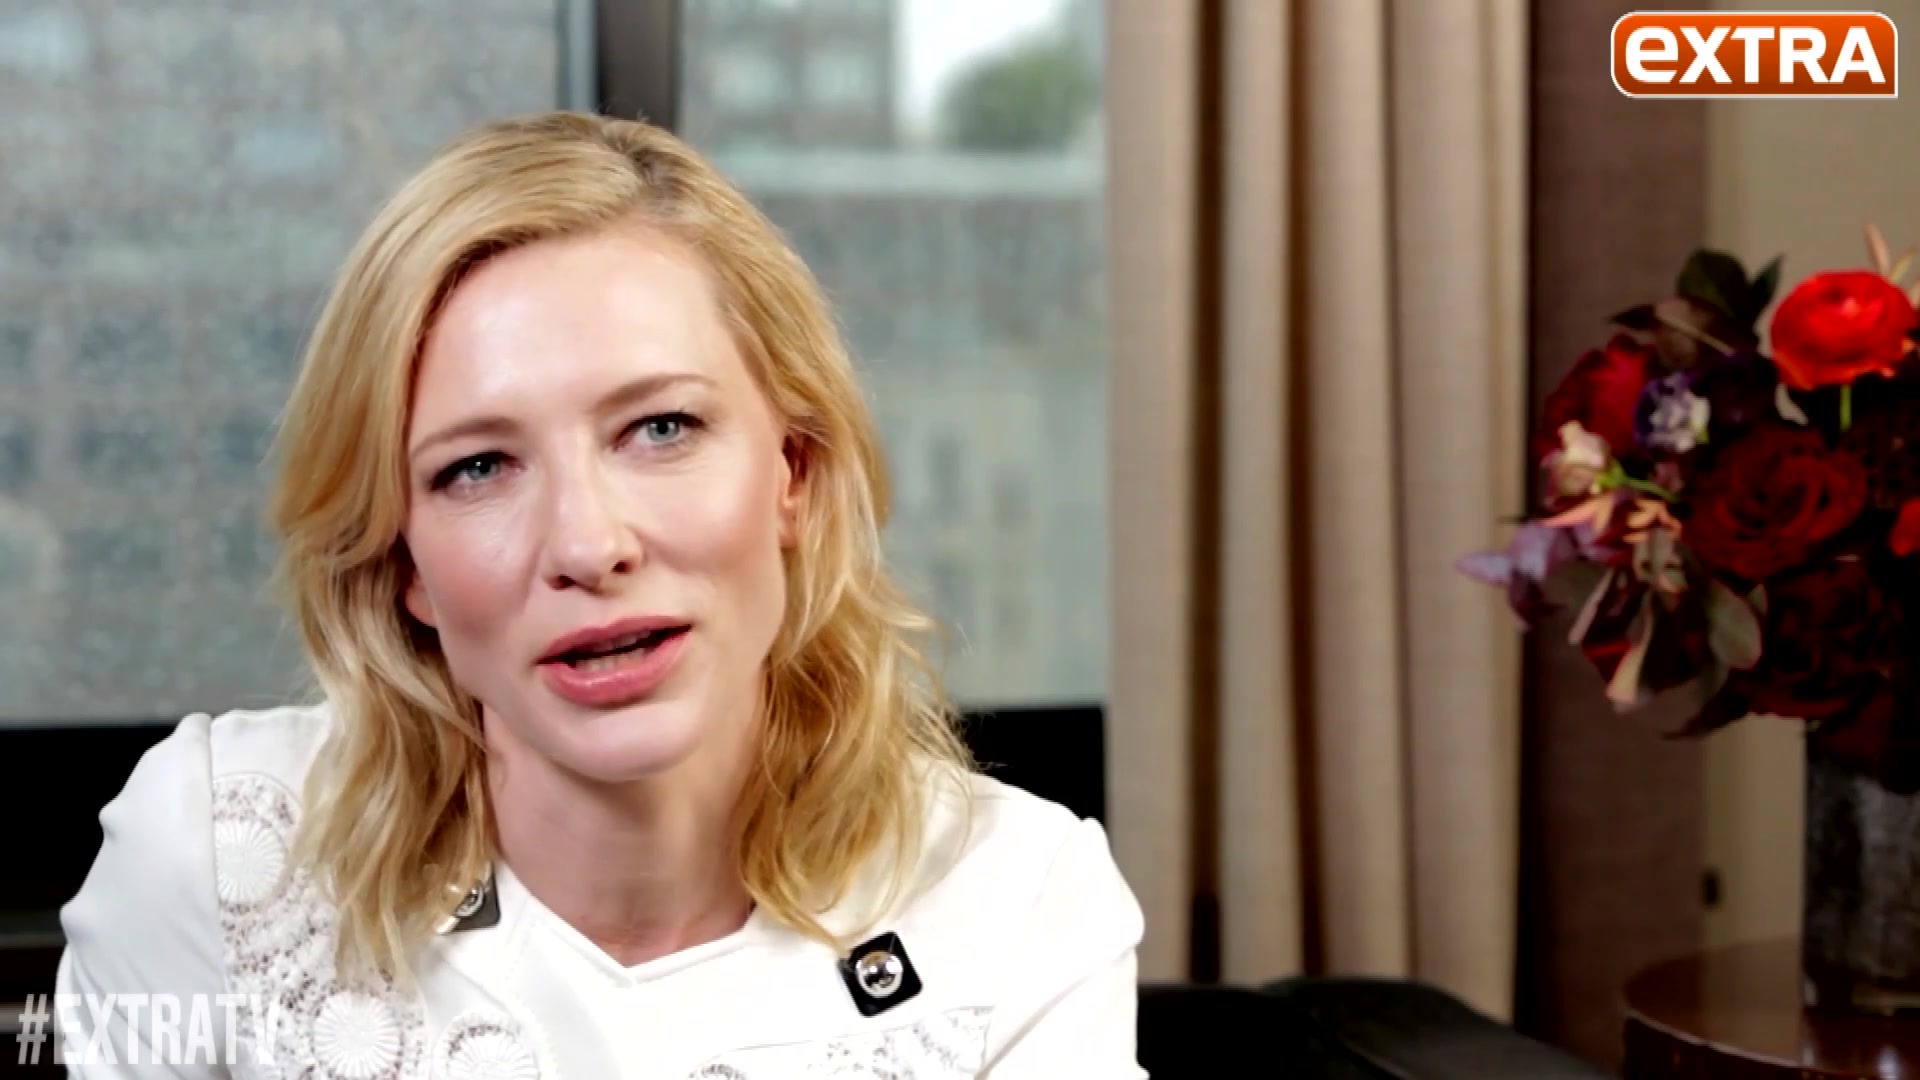 Video interview – Cate Blanchett promotes SK-II #changedestiny